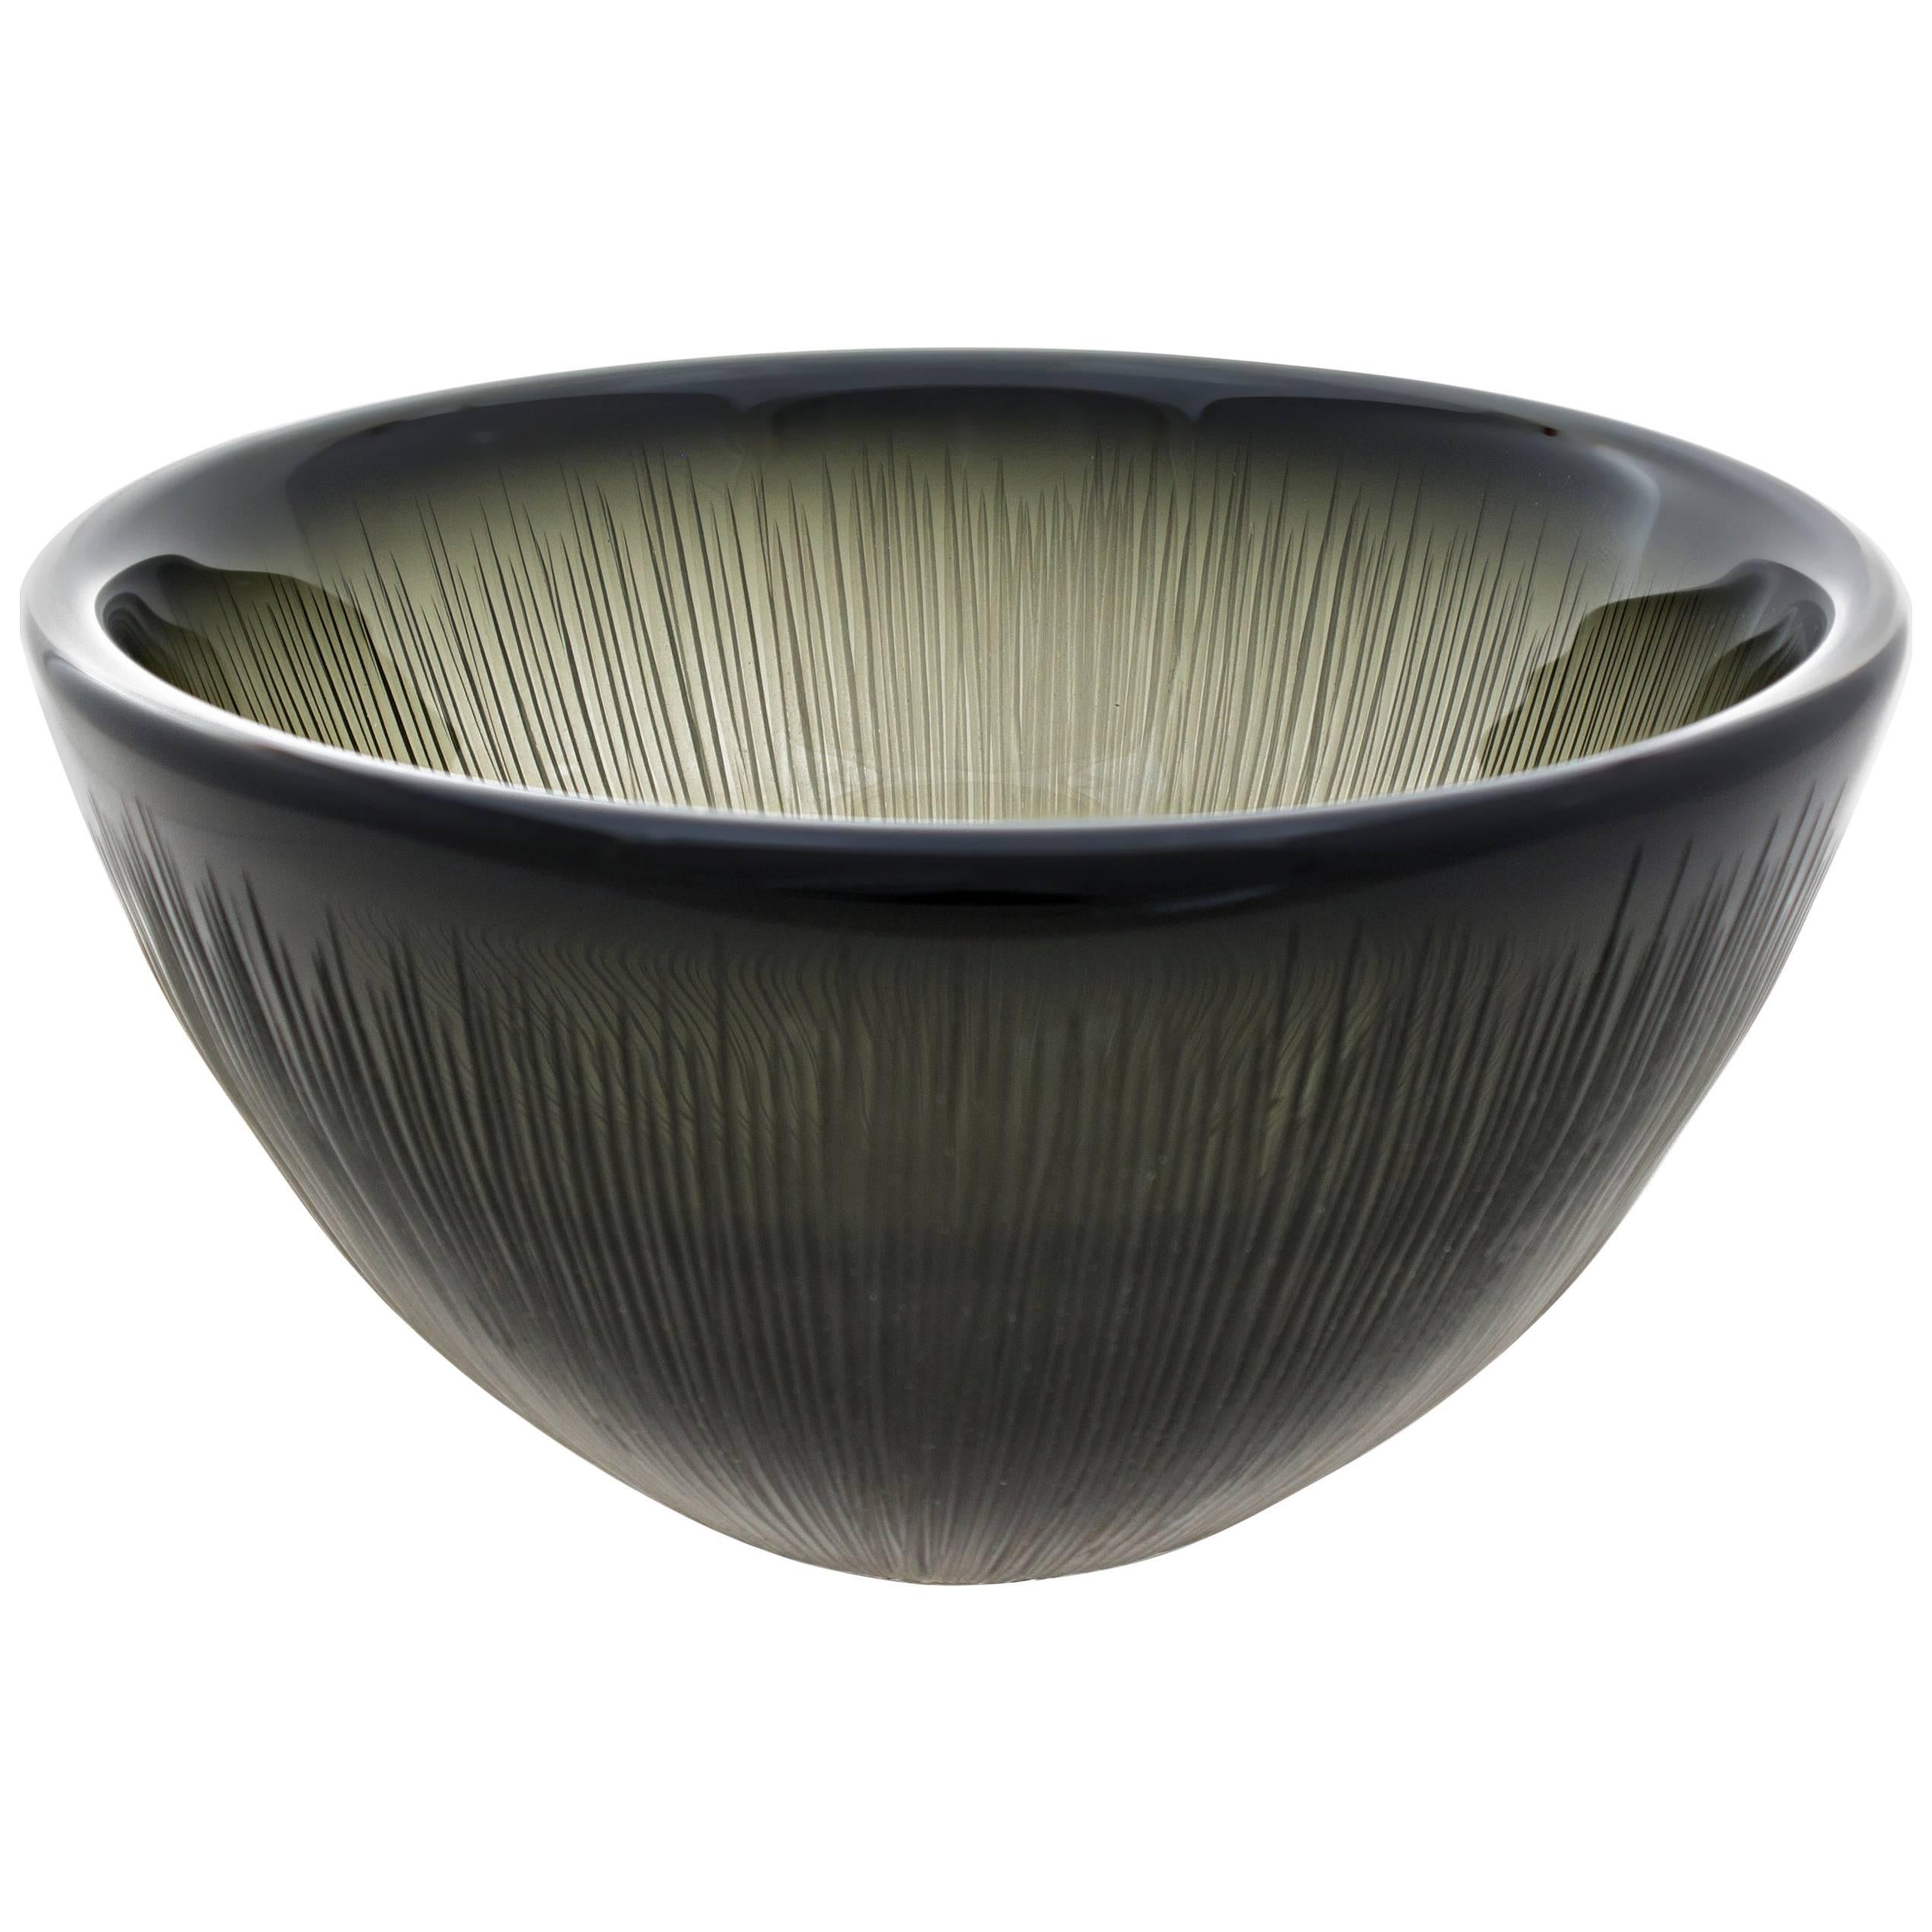 Earth Tone Carved Glass Bowl, Inciso Series by Designer Caleb Siemon